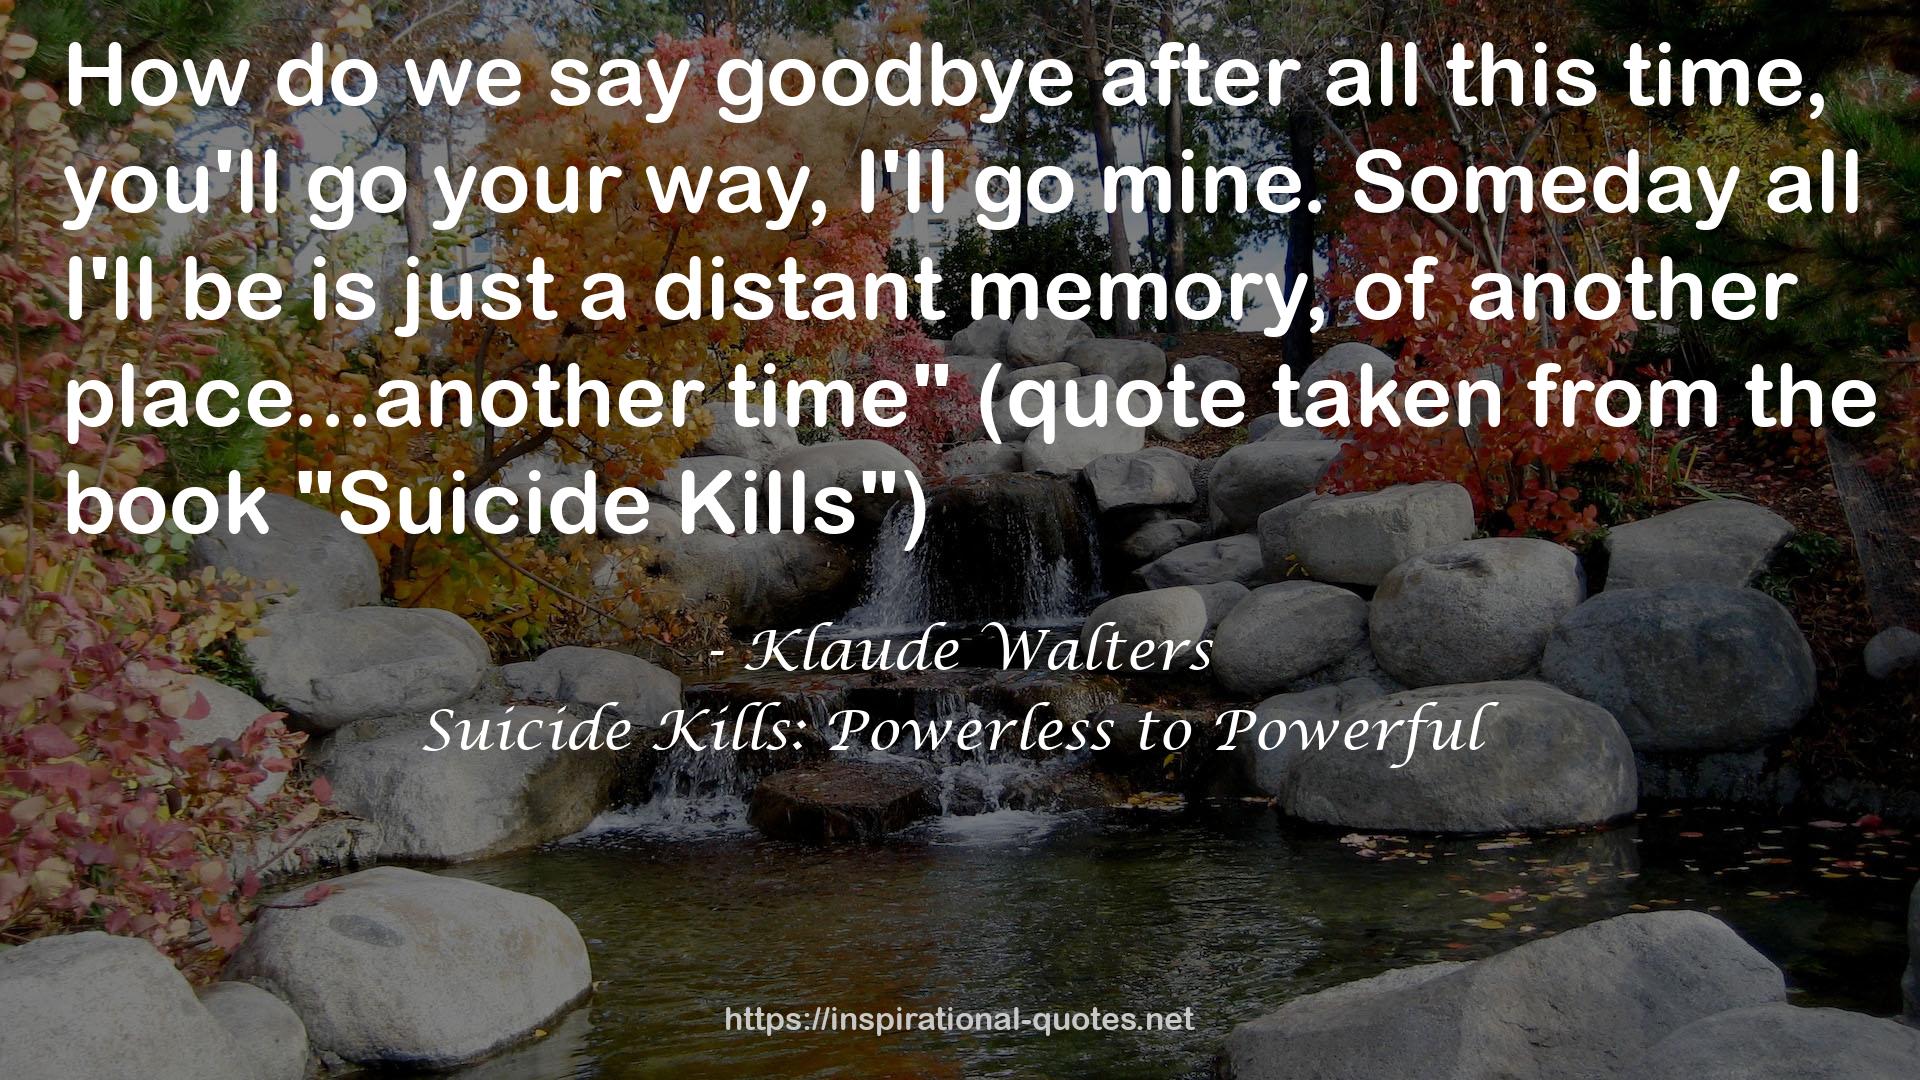 Suicide Kills: Powerless to Powerful QUOTES